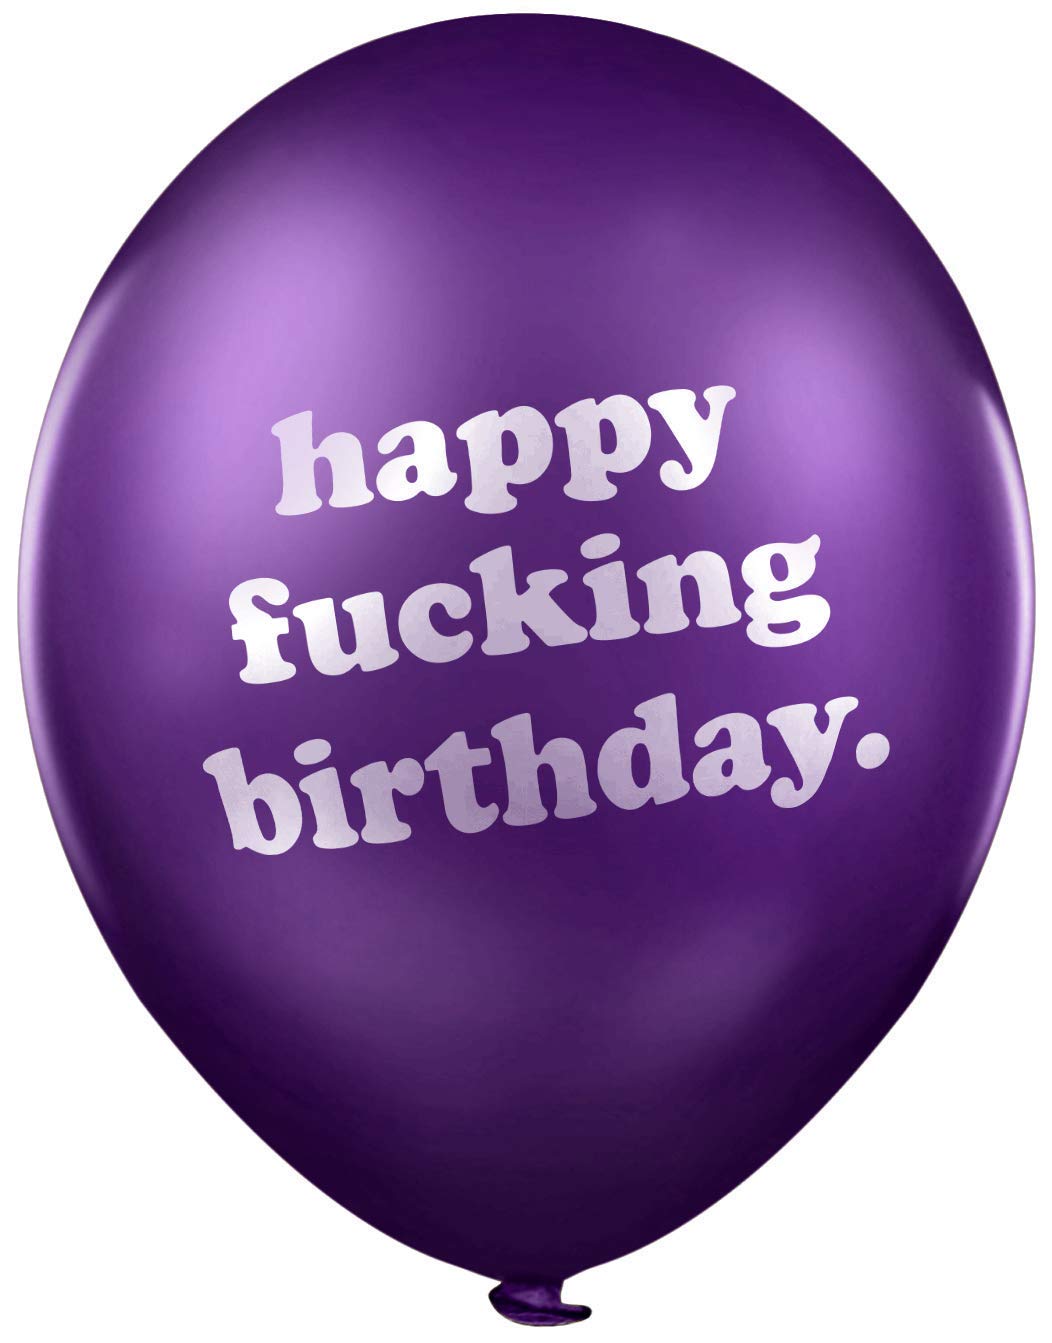 40th Birthday Balloons - Pack of 12 funny rude lockdown birthday balloons gift idea for 40th birthday party decorations